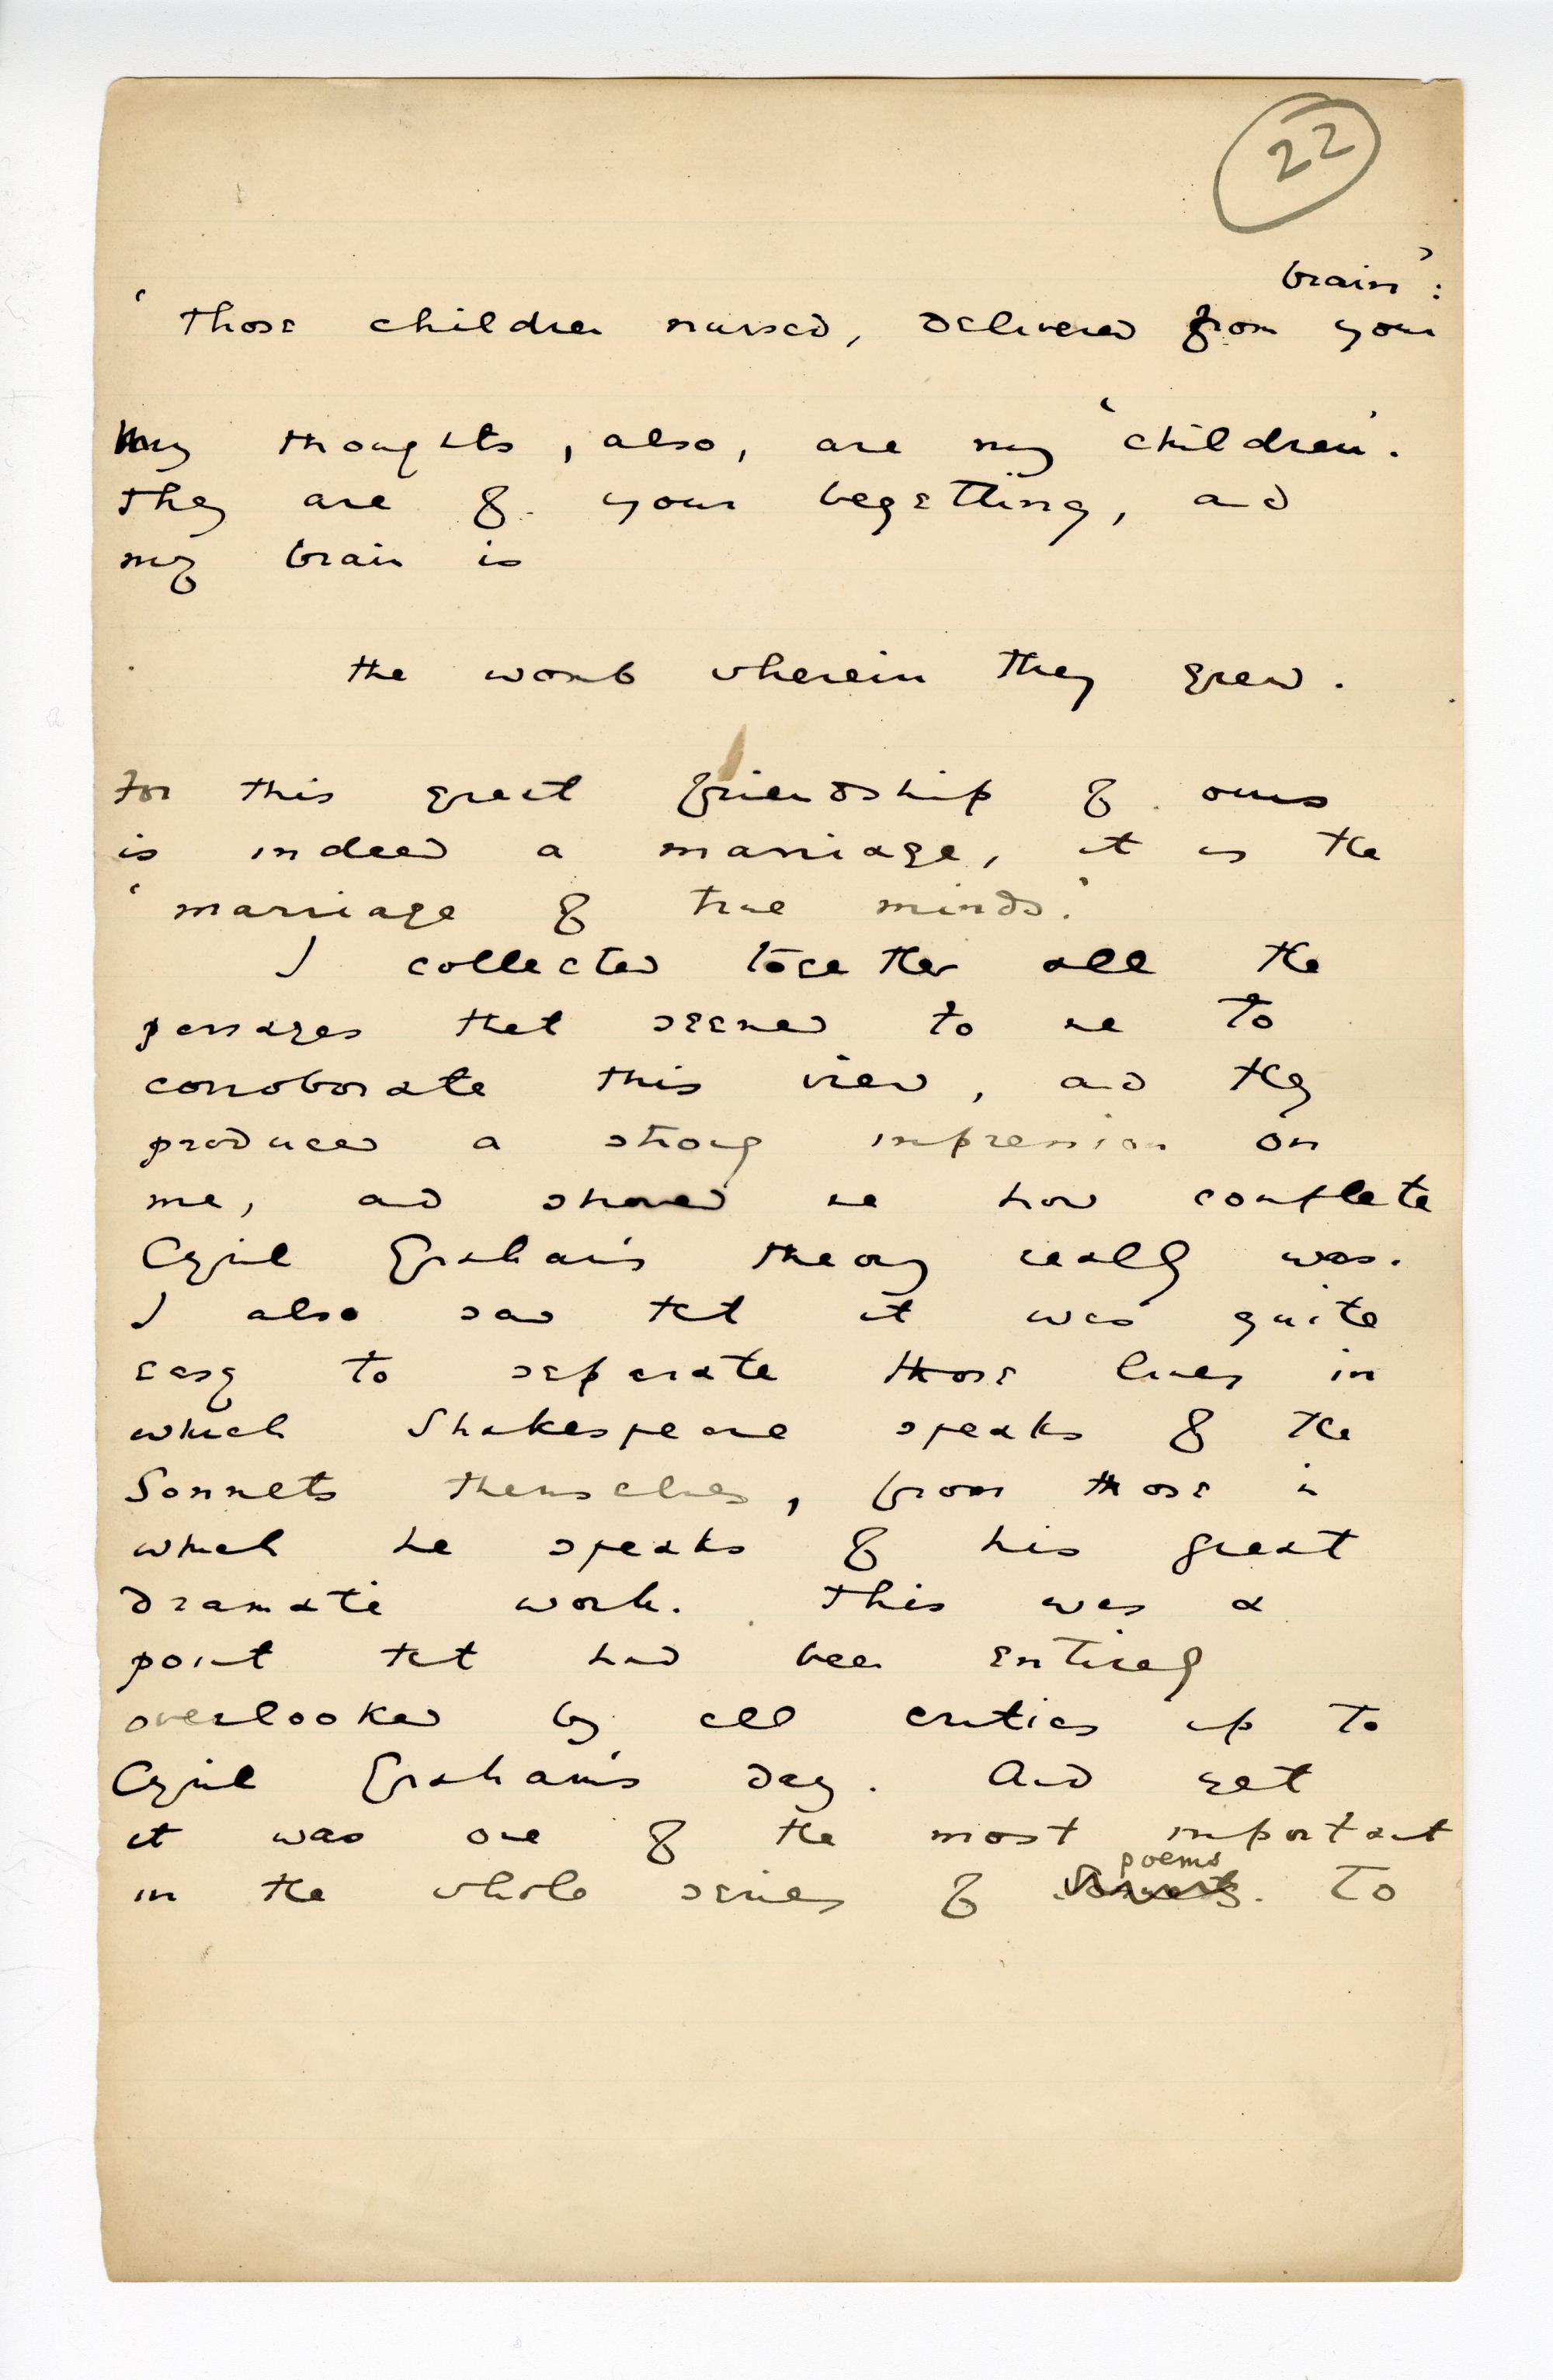 Folio 22 is a handwritten notebook page with no cutouts. There is space at the bottom for Wilde to continue, but he ends with "To" seemingly in order to have the Blackwood's page on Folio 23 pick up where this page leaves off.